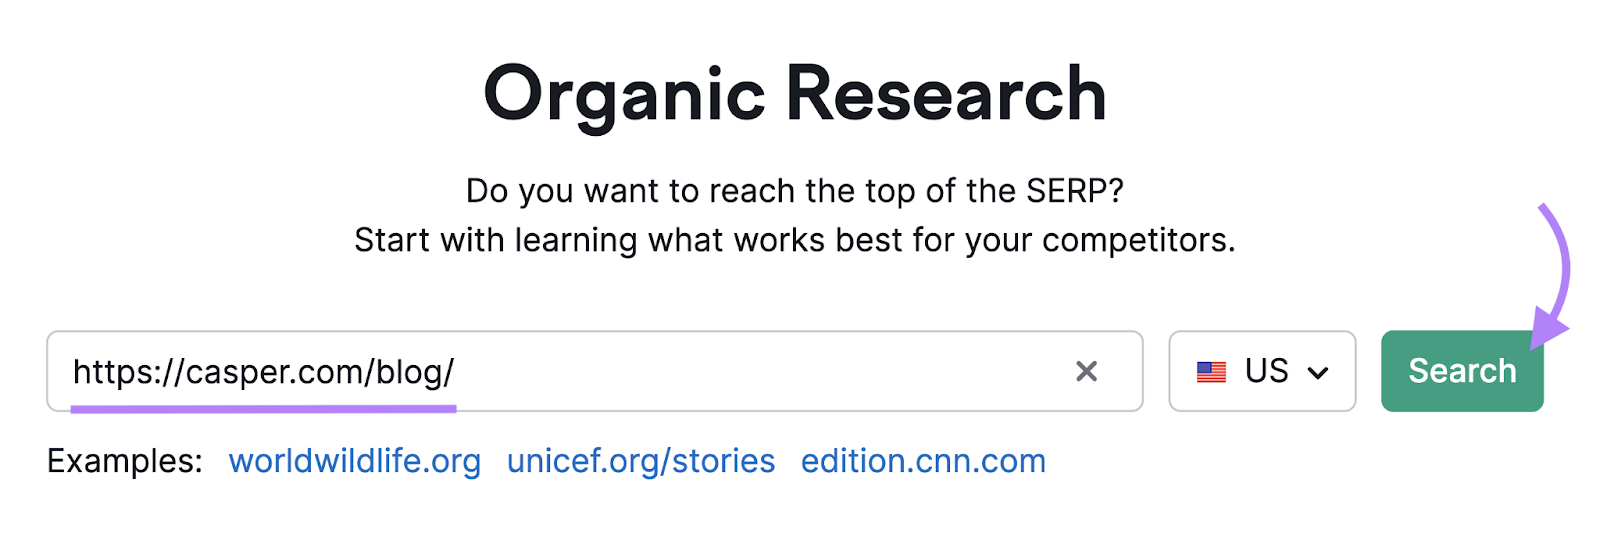 "https://casper.com/blog/" domain entered into the Organic Research tool search bar